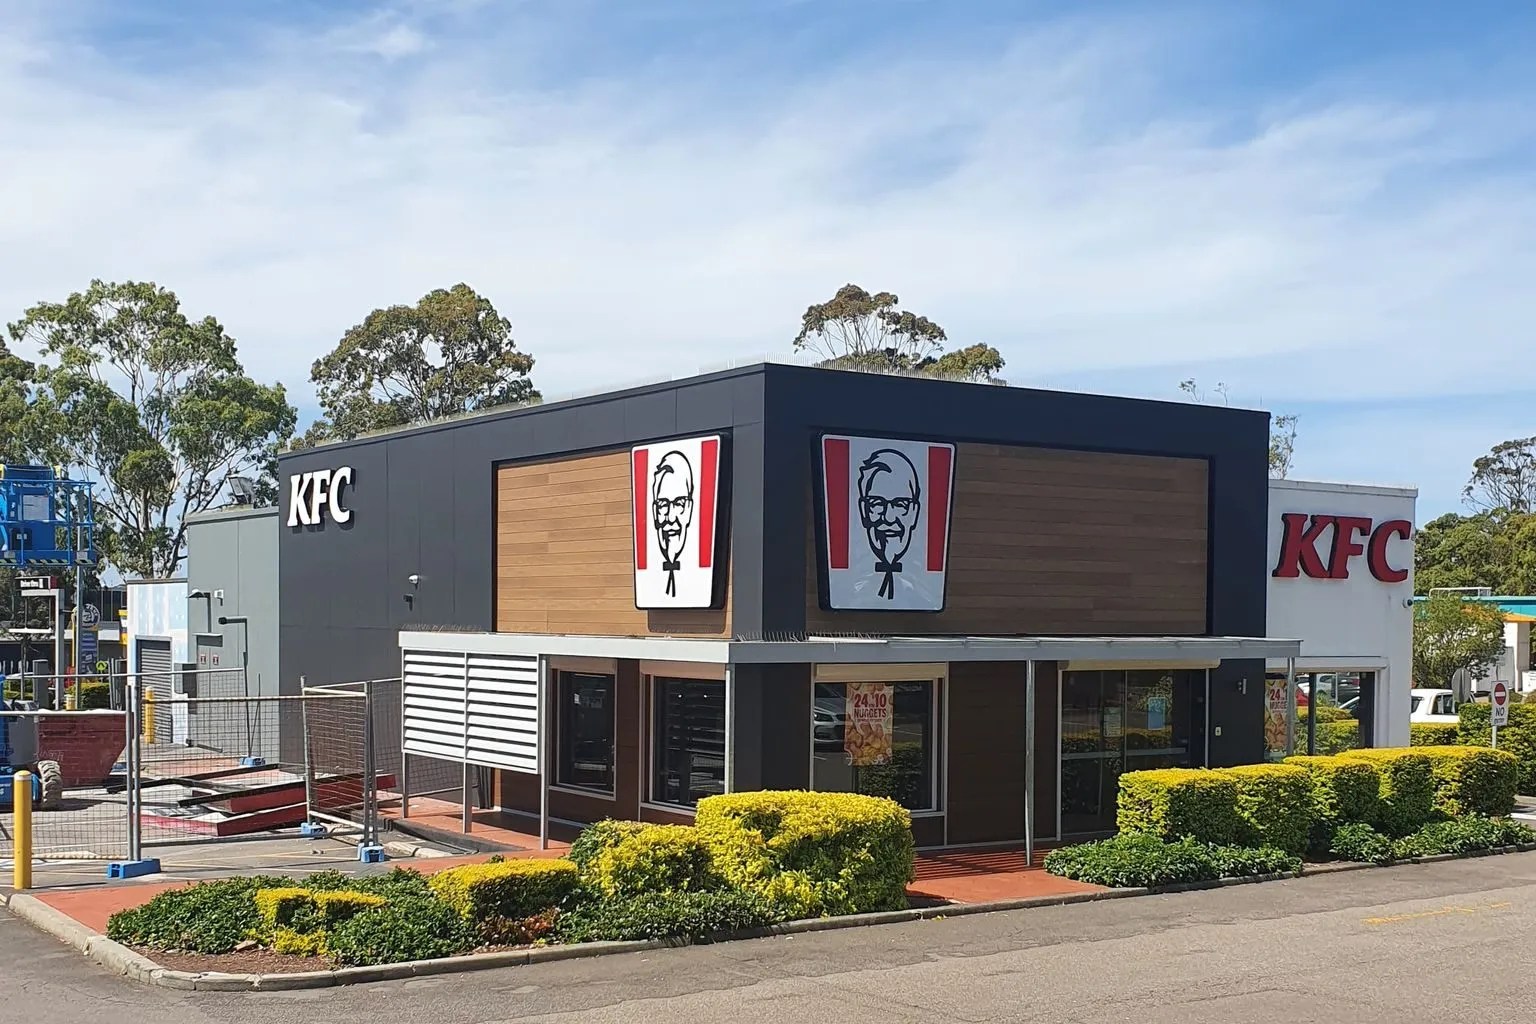 A KFC restaurant located in a parking lot.